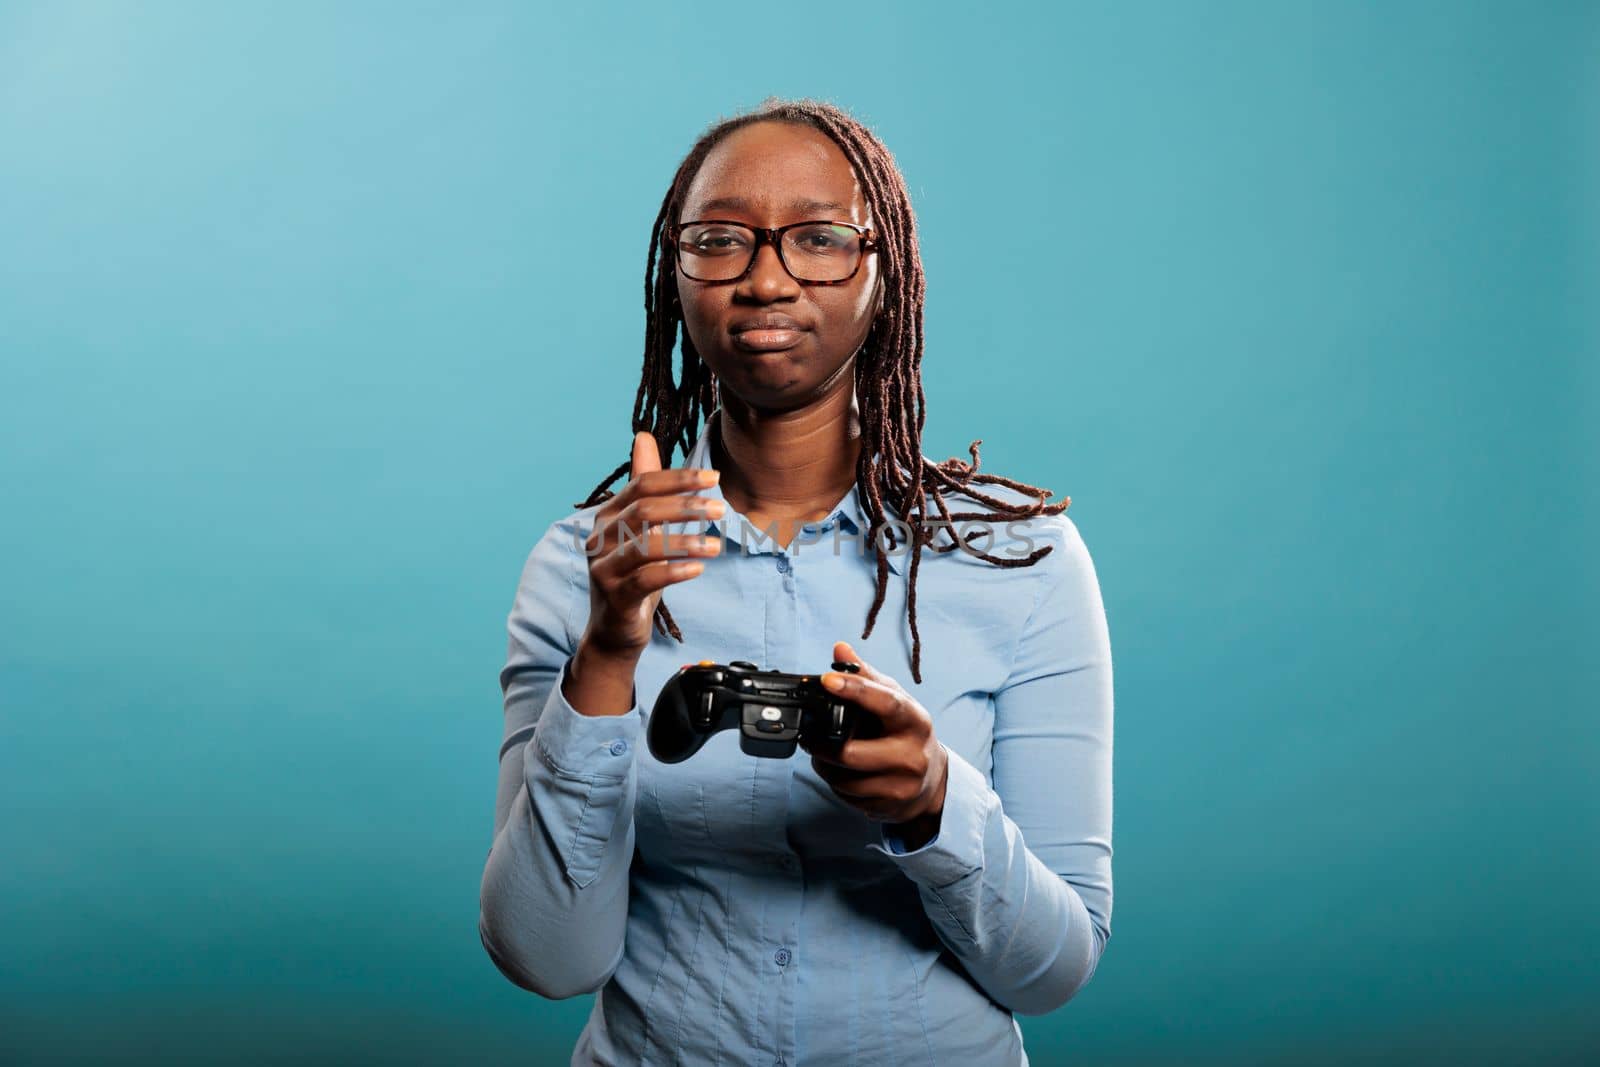 Sad young adult lady with modern gaming console controller standing on blue background. African american woman got upset because of lost online competitive videogame match.